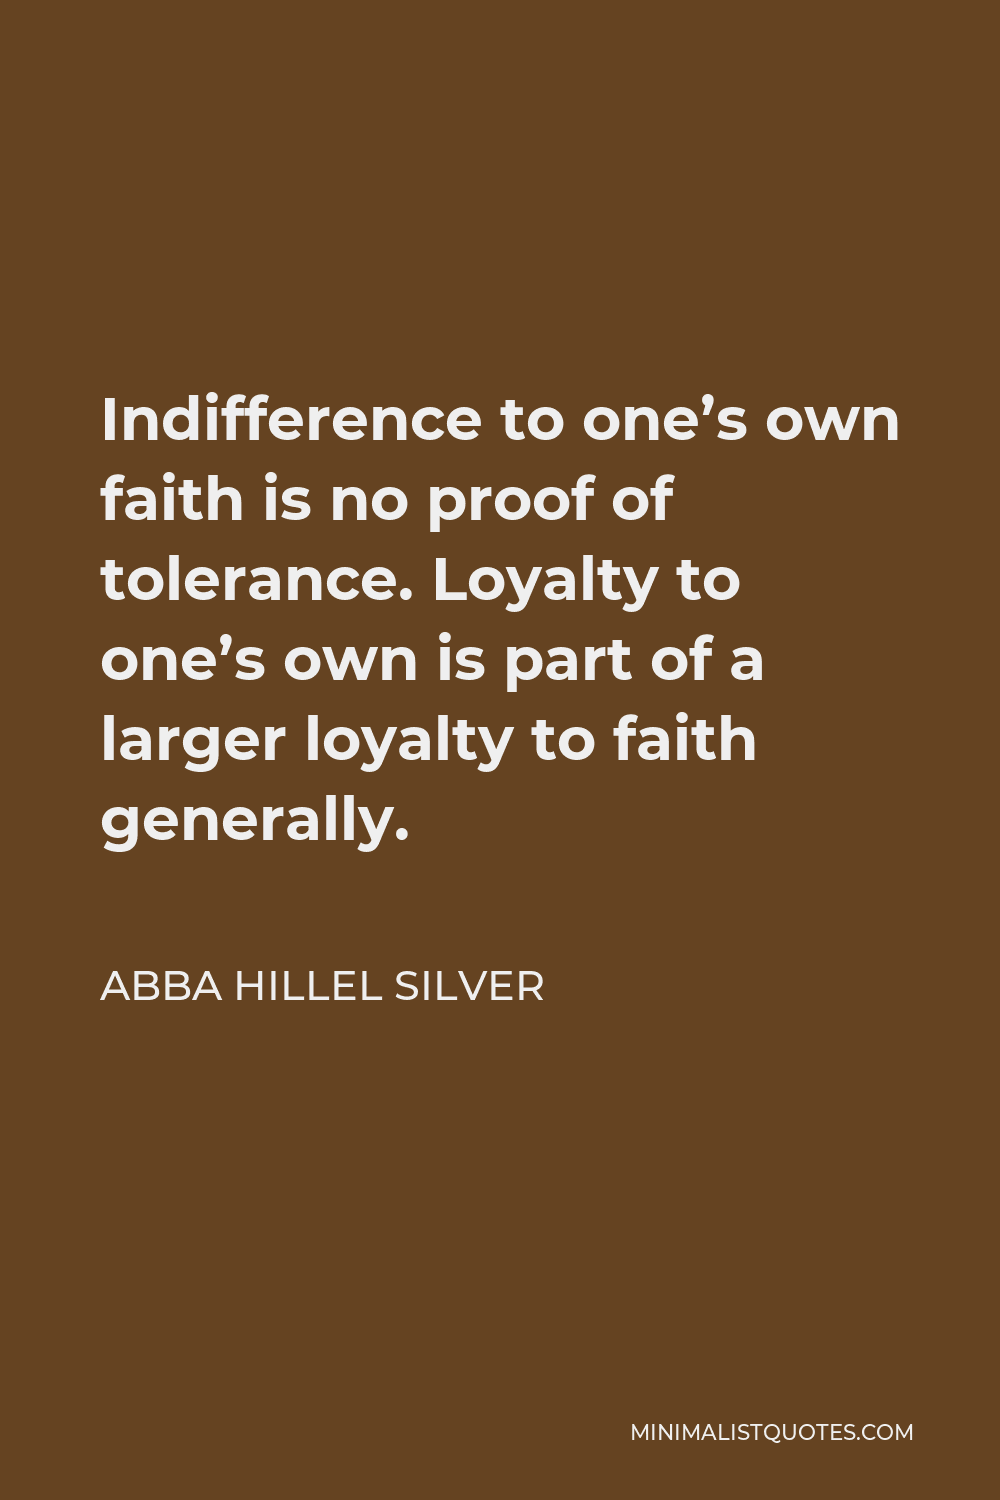 Abba Hillel Silver Quote - Indifference to one’s own faith is no proof of tolerance. Loyalty to one’s own is part of a larger loyalty to faith generally.